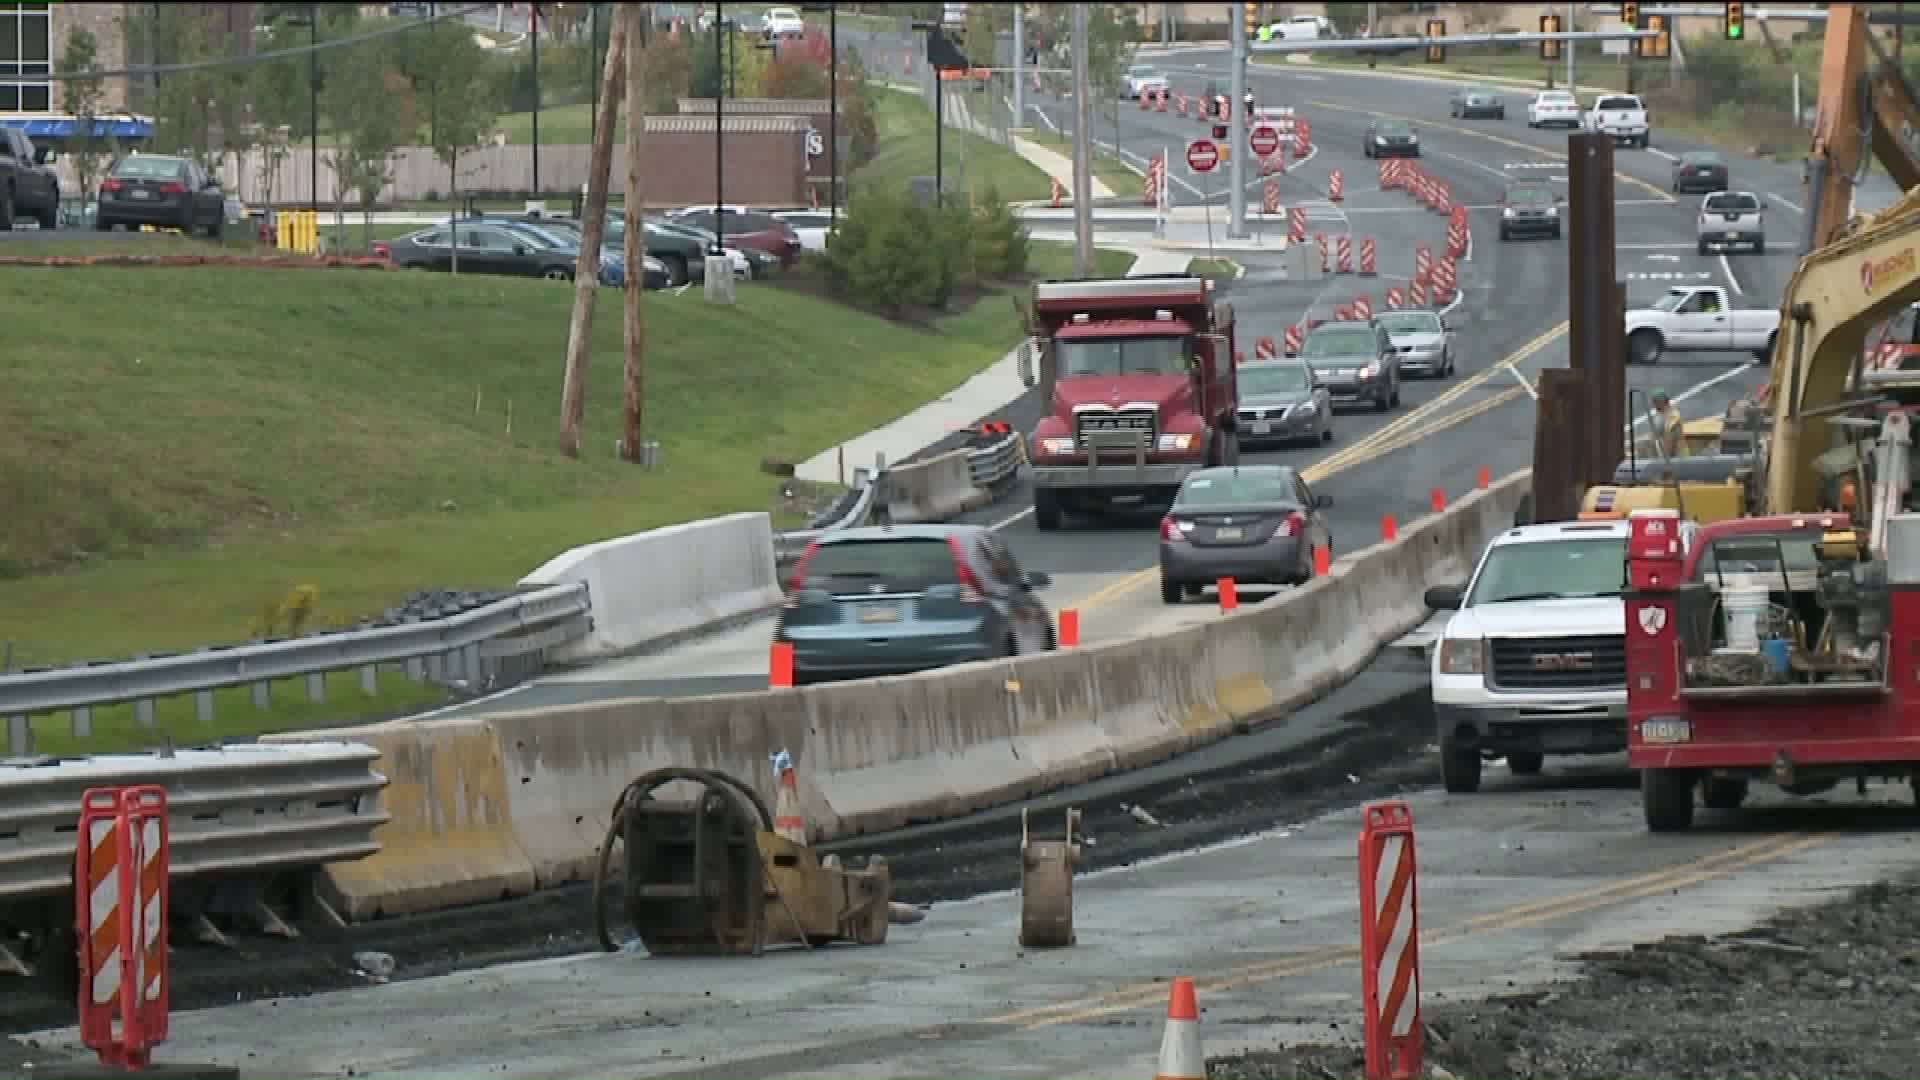 Road Work on Route 611 Causing Problems for Businesses